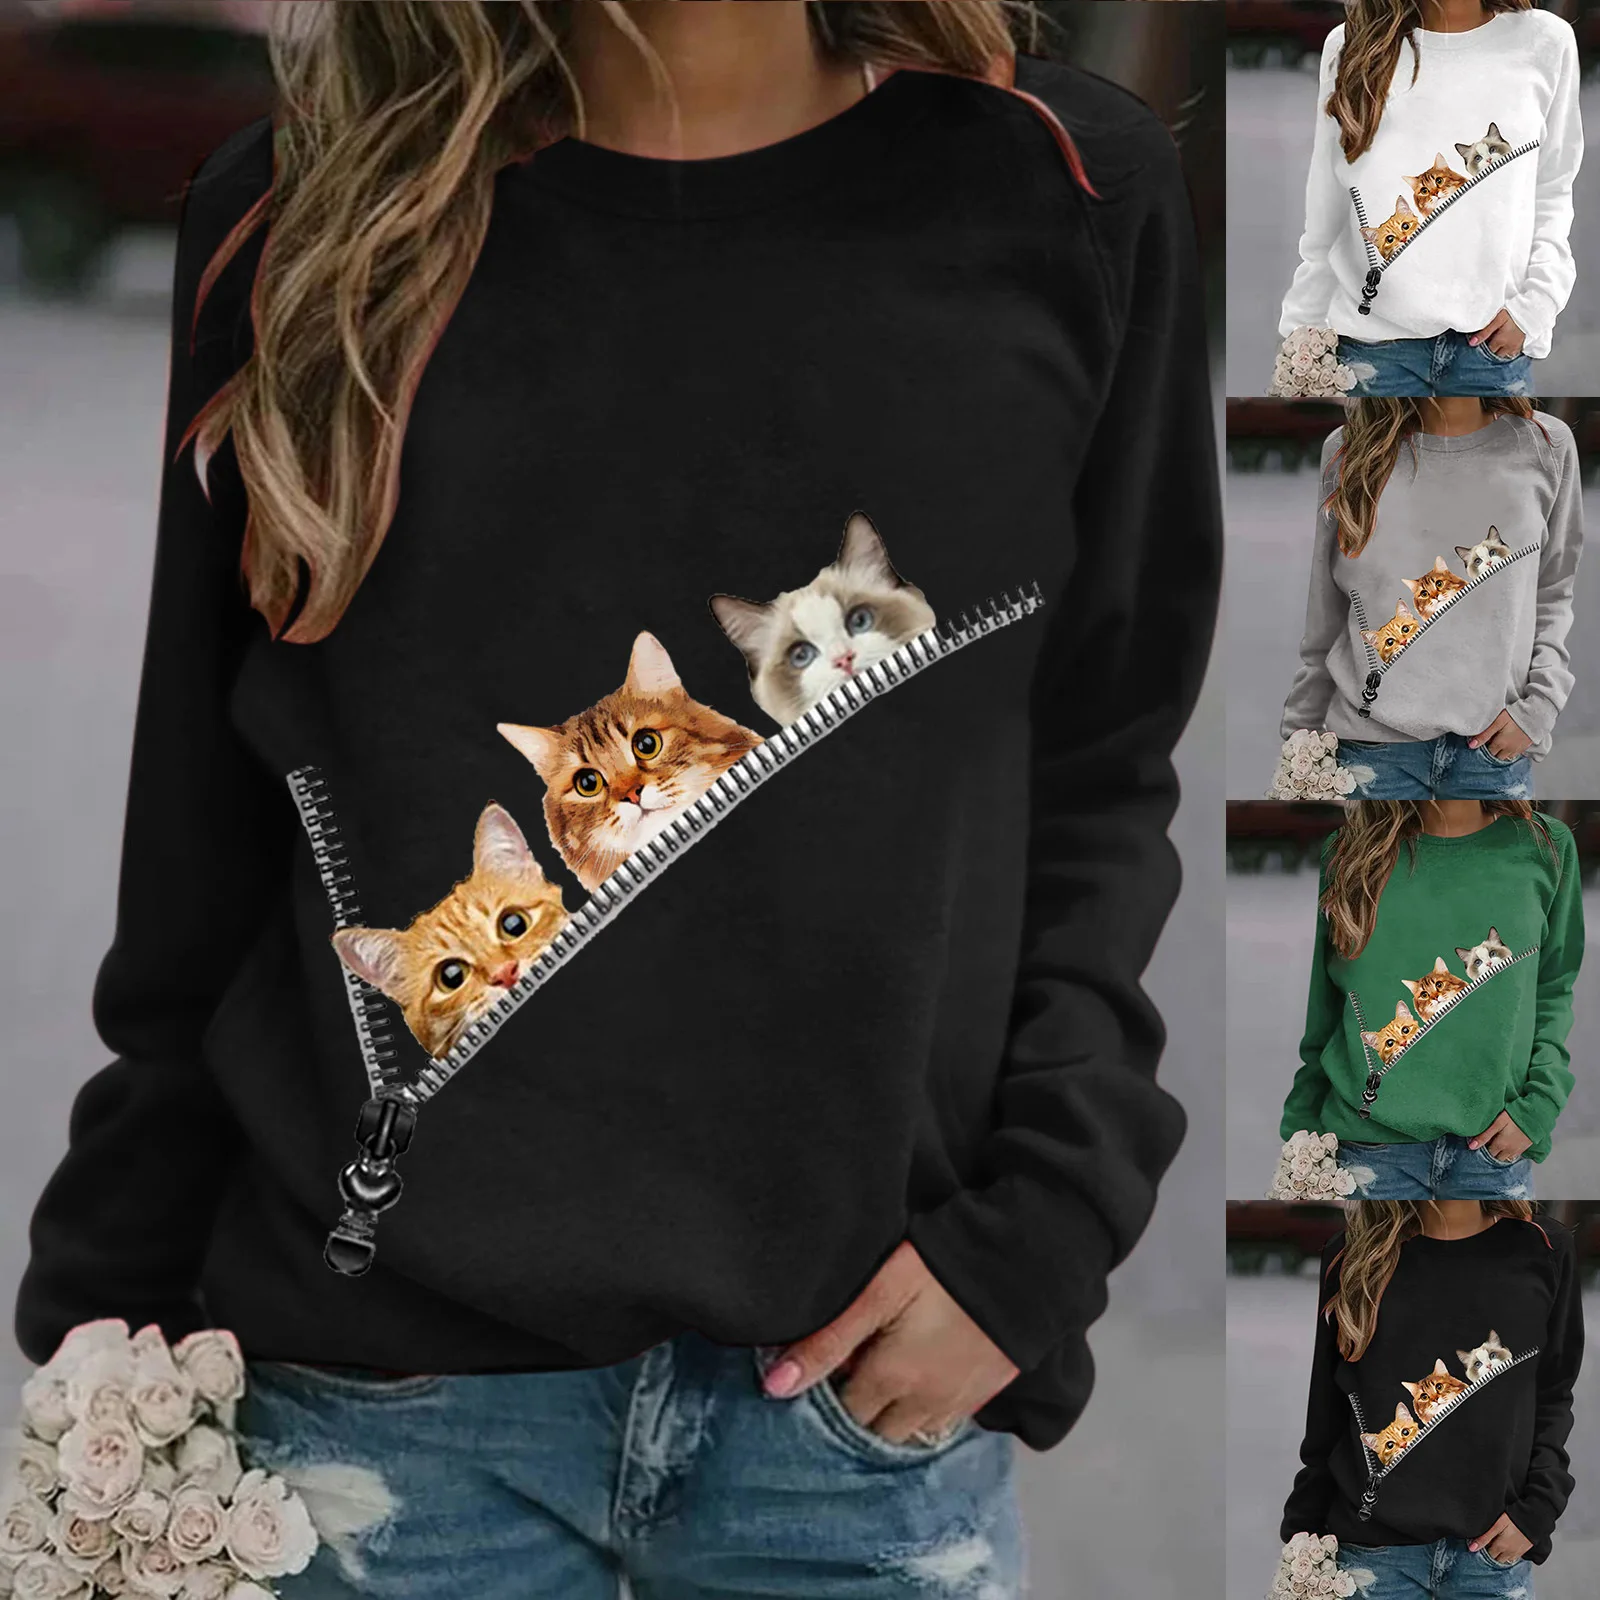 Fun cat print sweater men's and women's pullover sweater fashion tops